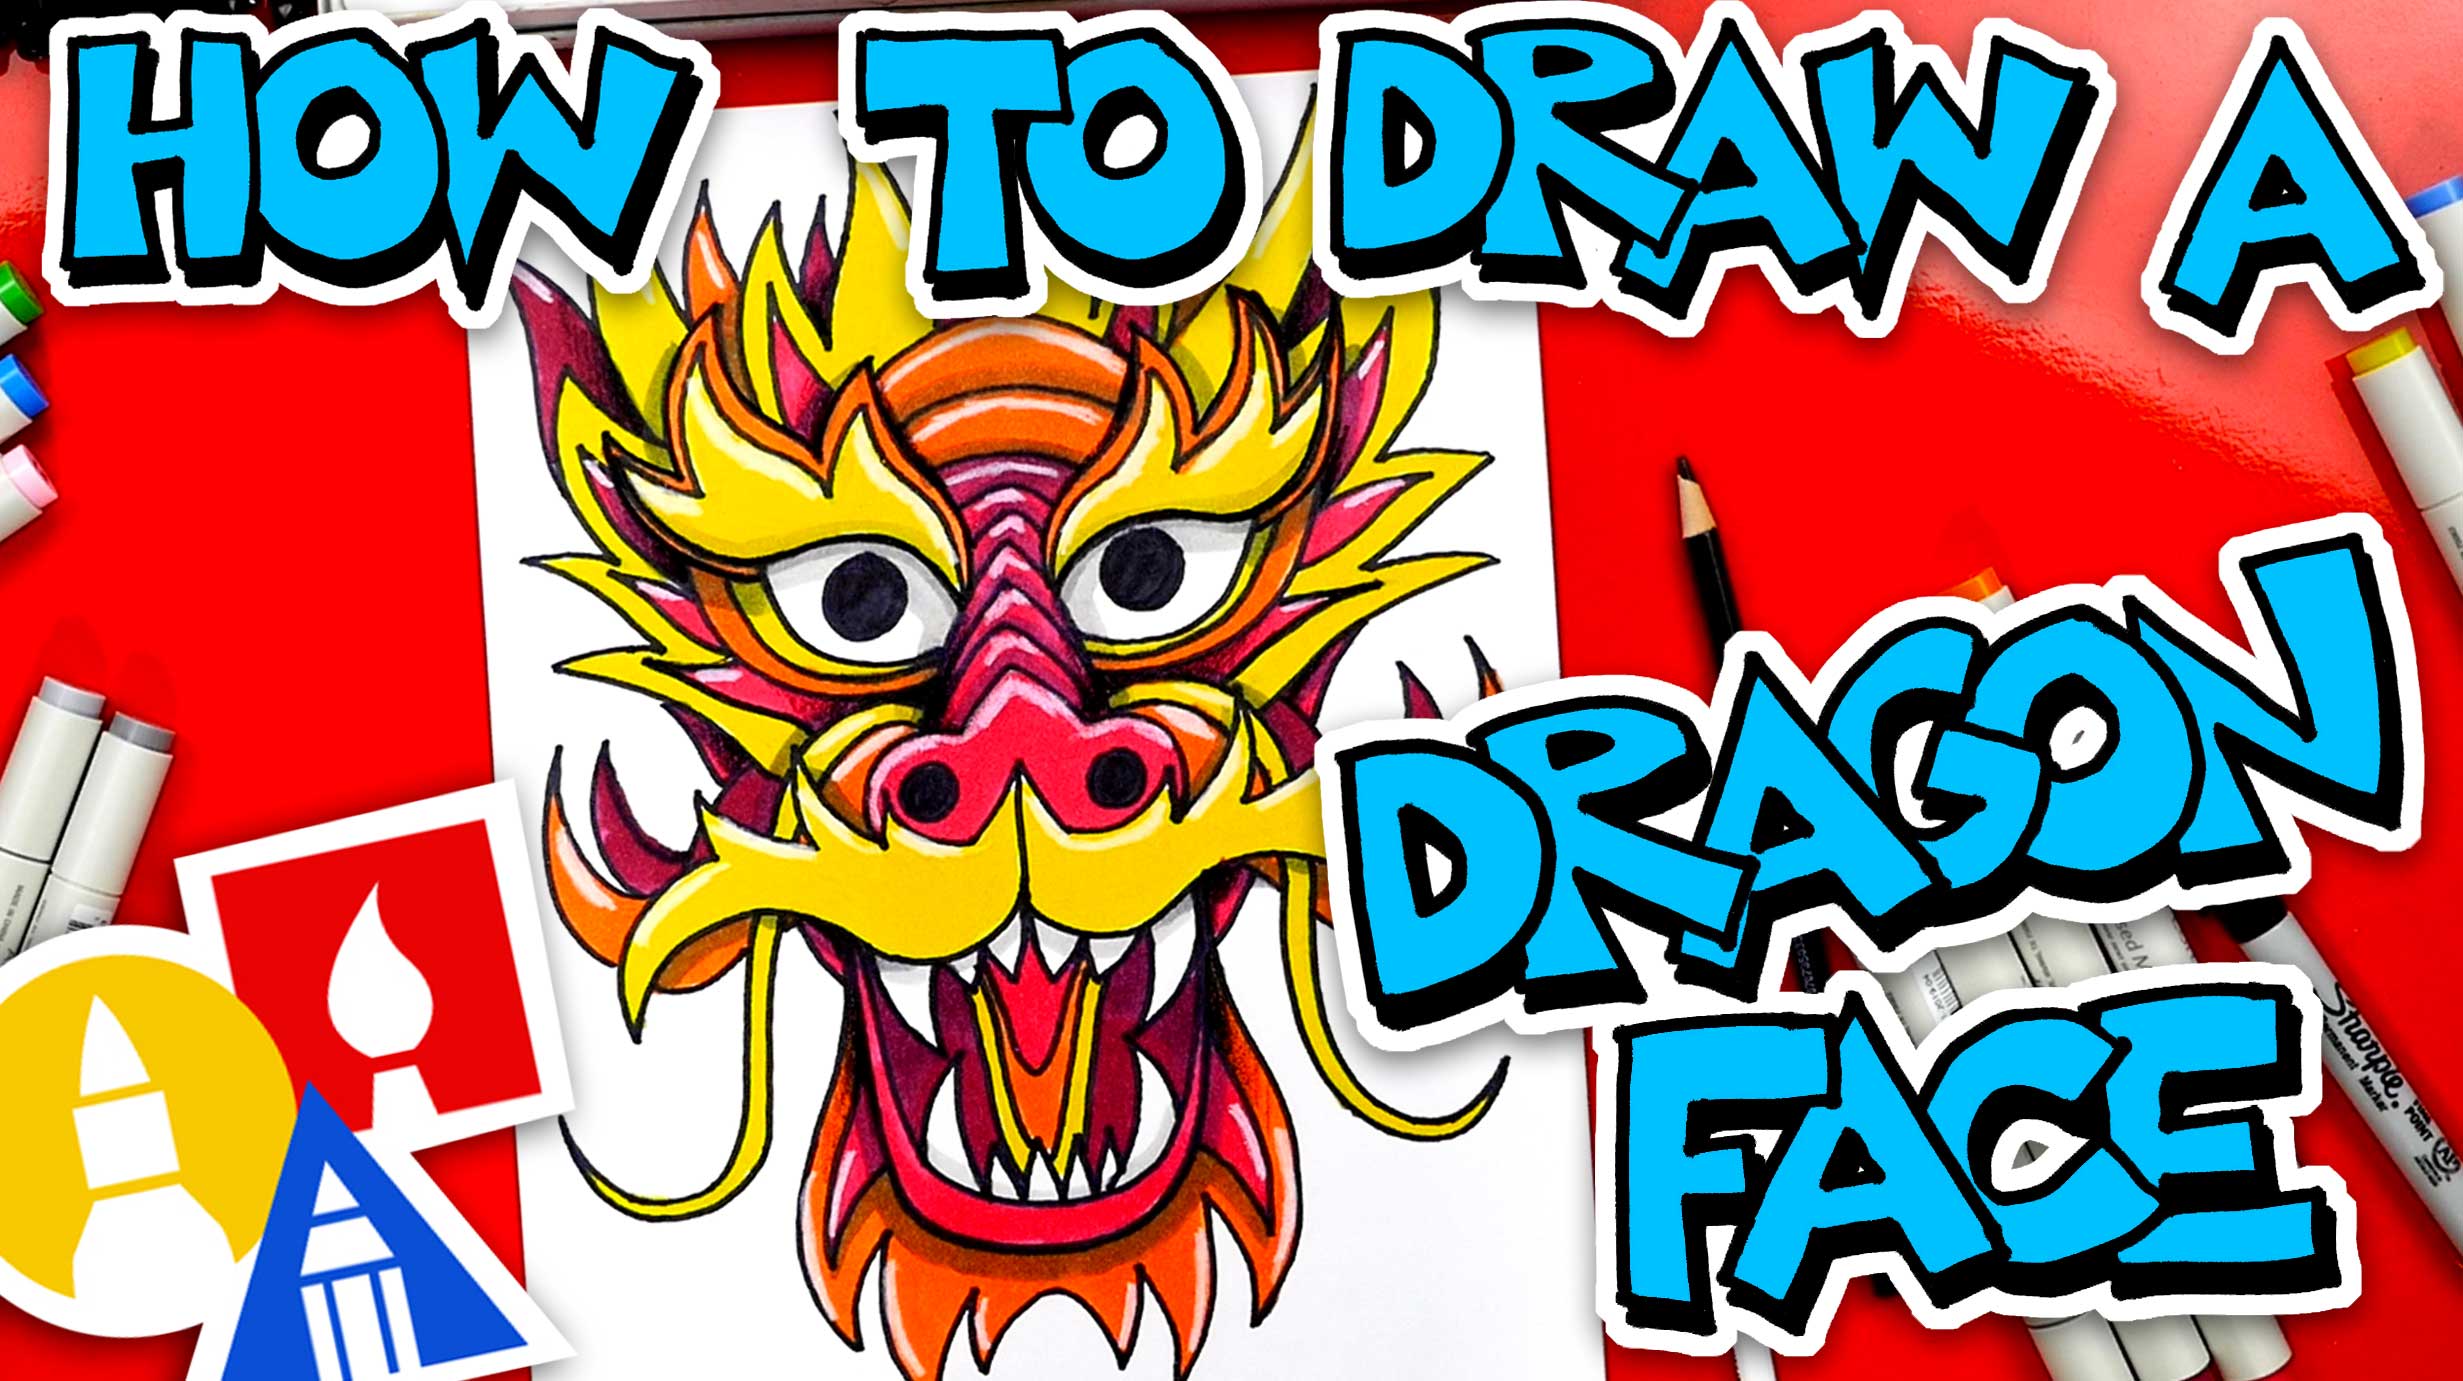 How To Draw A Chinese Dragon Face - Art For Kids Hub